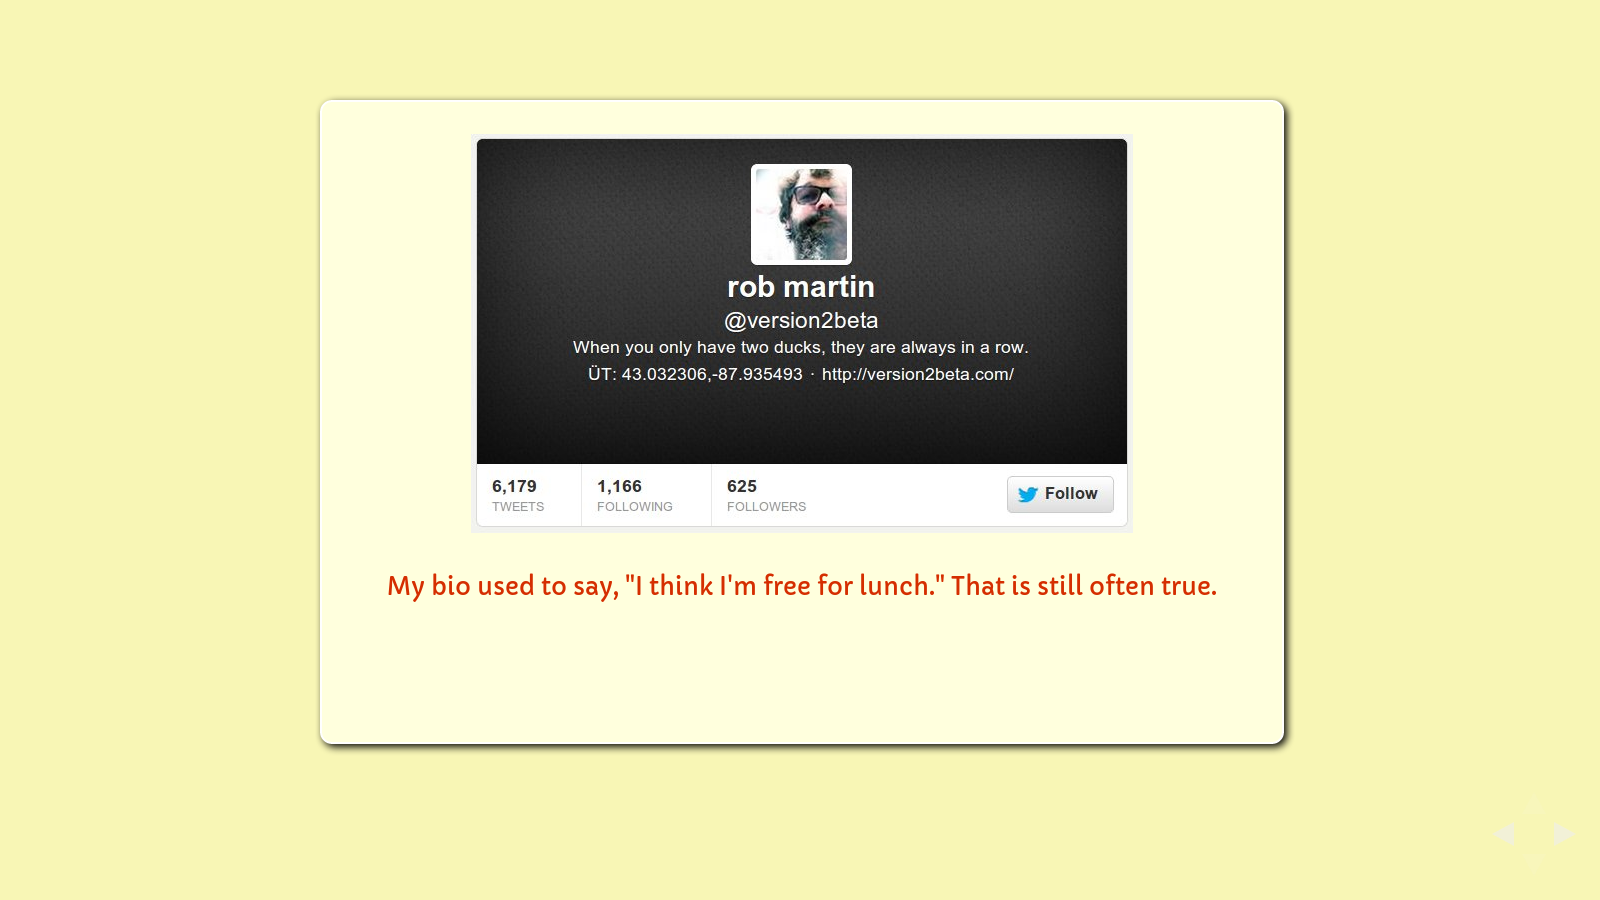 Slide: Twitter avatar and bio, "When you only have two ducks, they are always in a row."